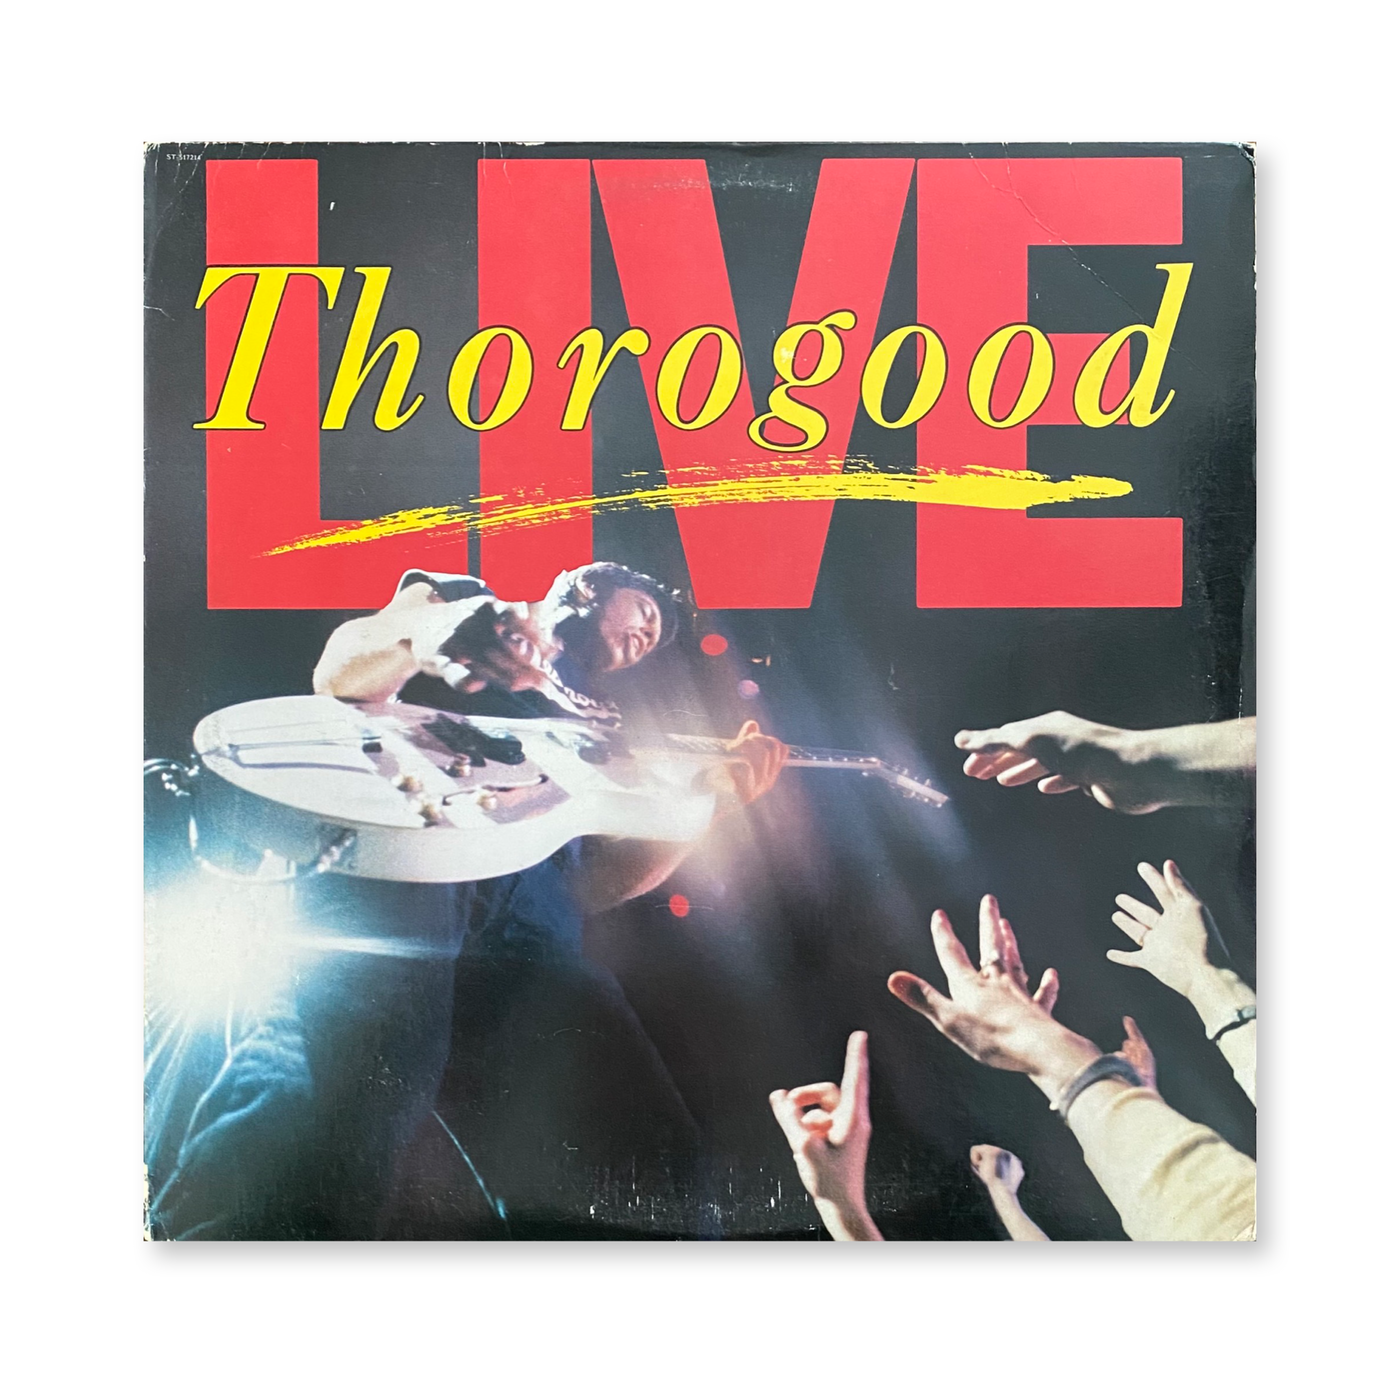 George Thorogood & The Destroyers - Live